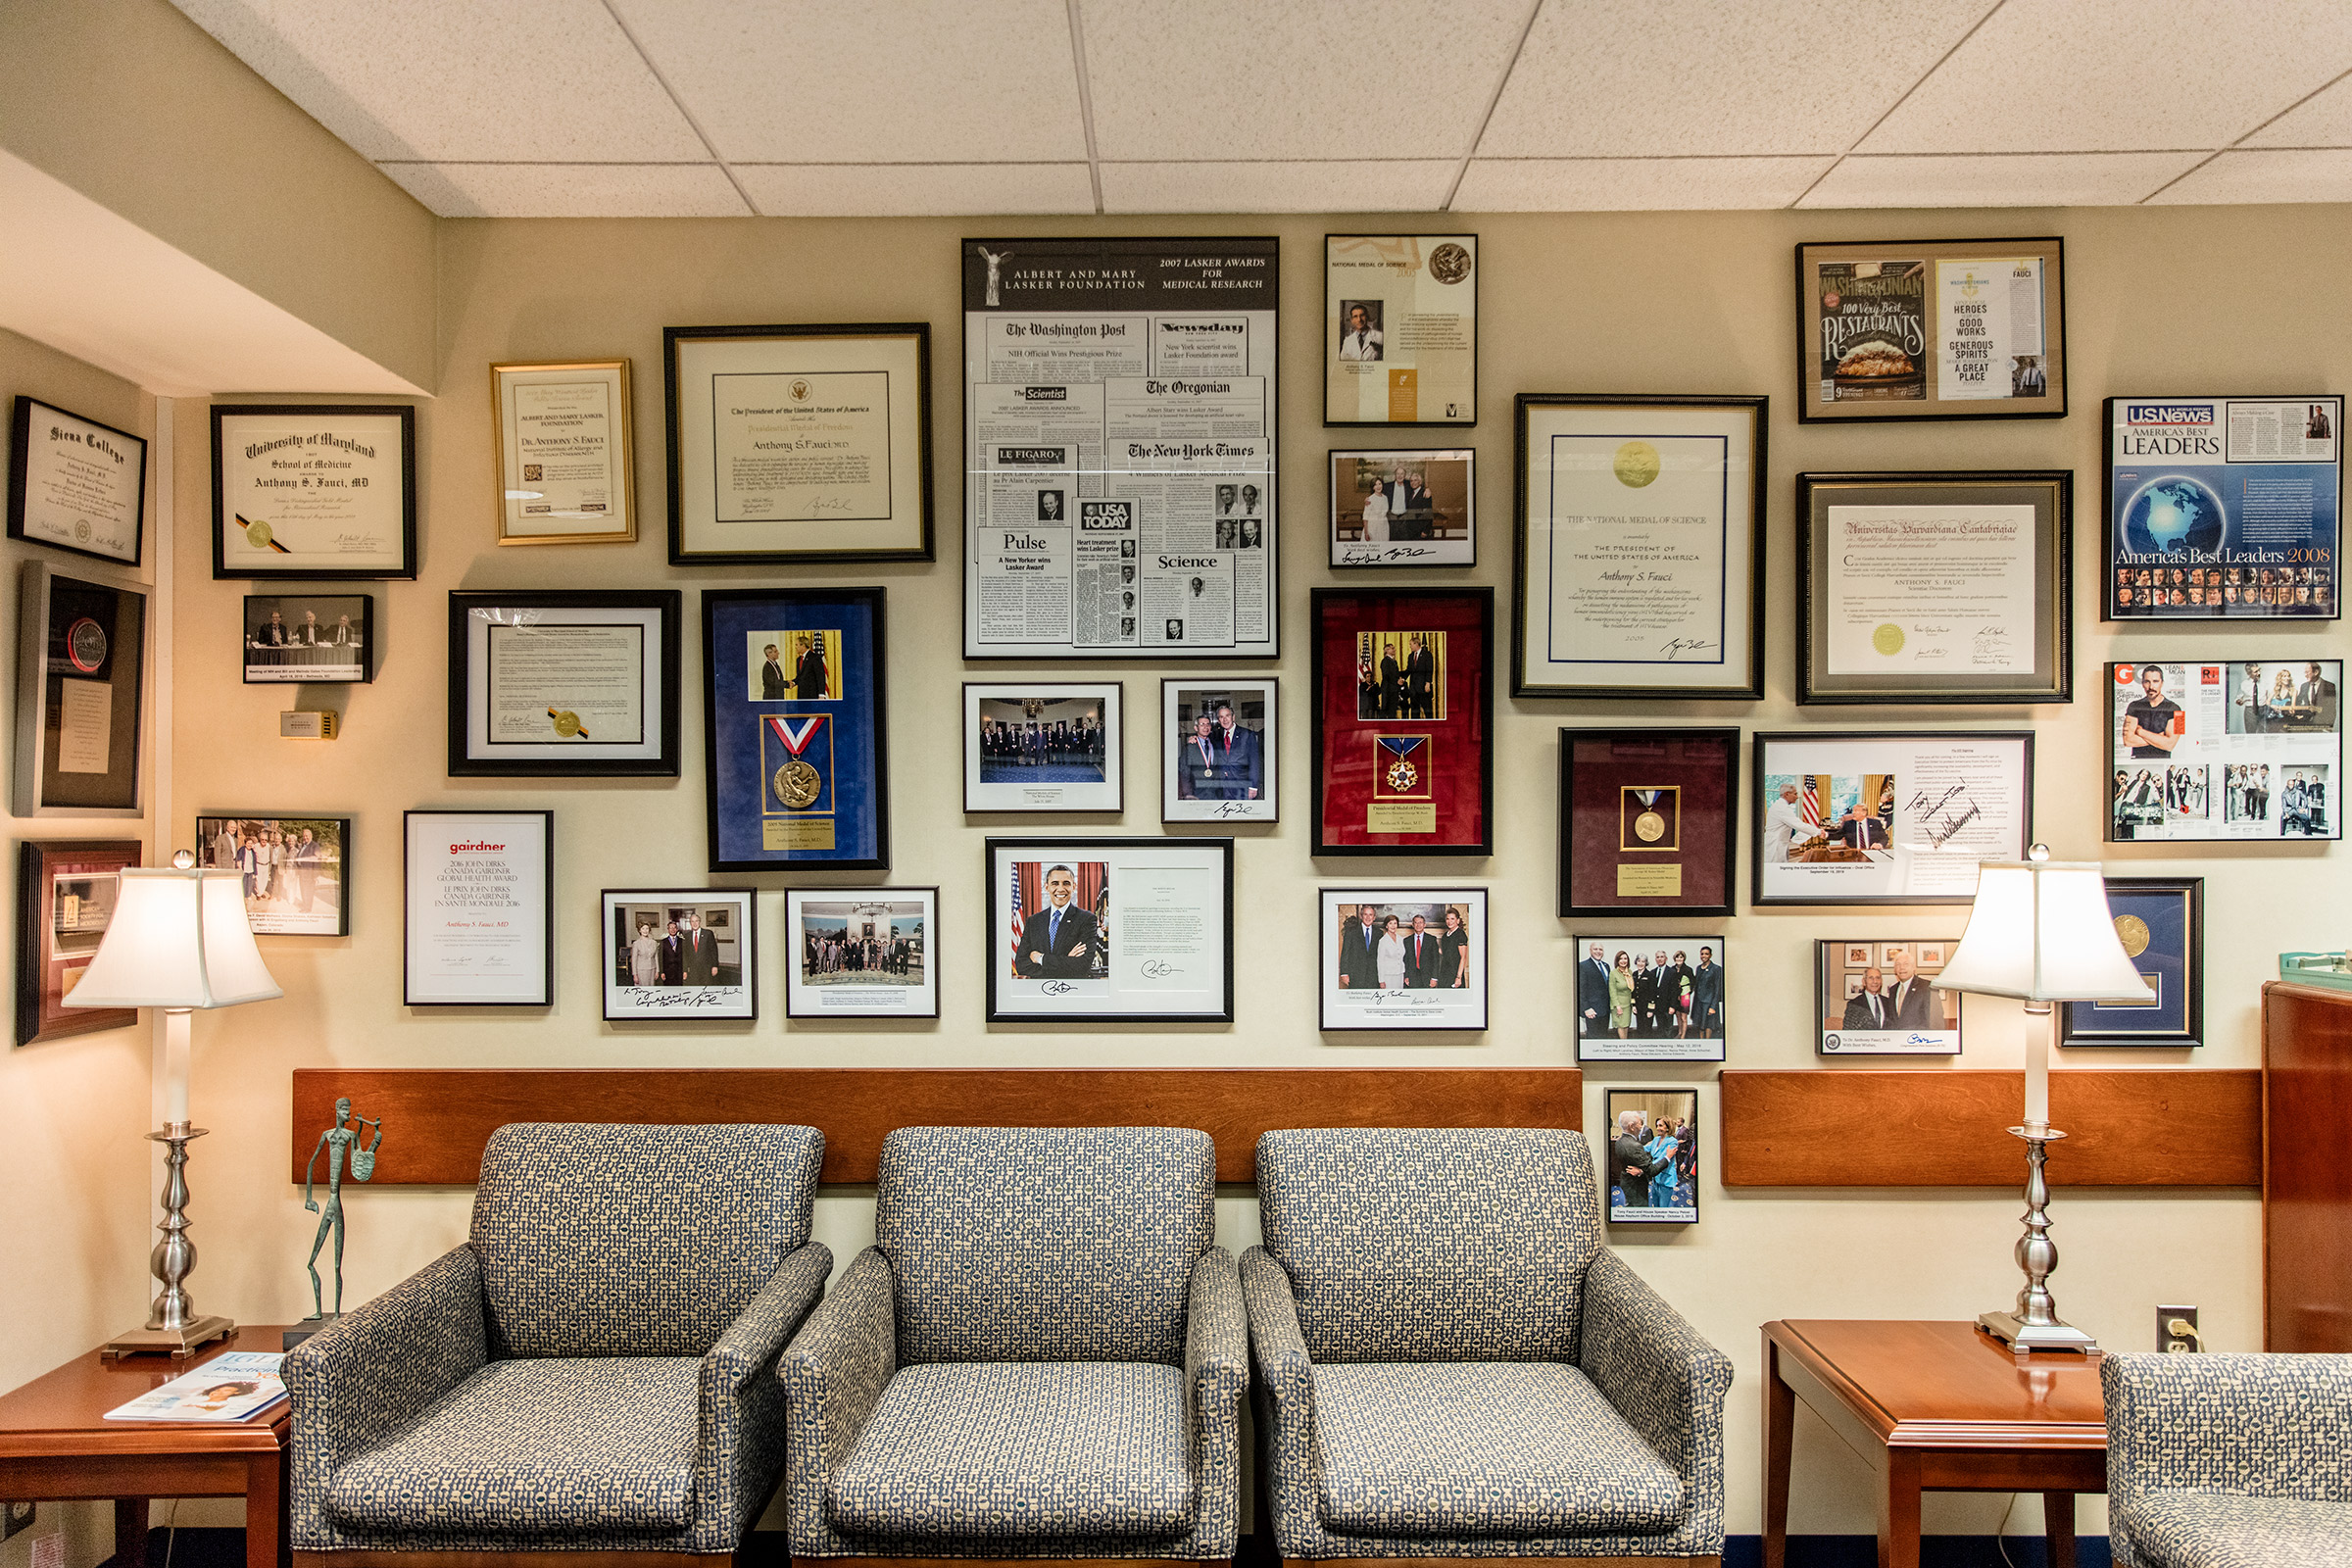 Fauci's office at the National Institutes of Health in Bethesda, Md., on Sept. 10, 2020. (Stefan Ruiz for TIME)